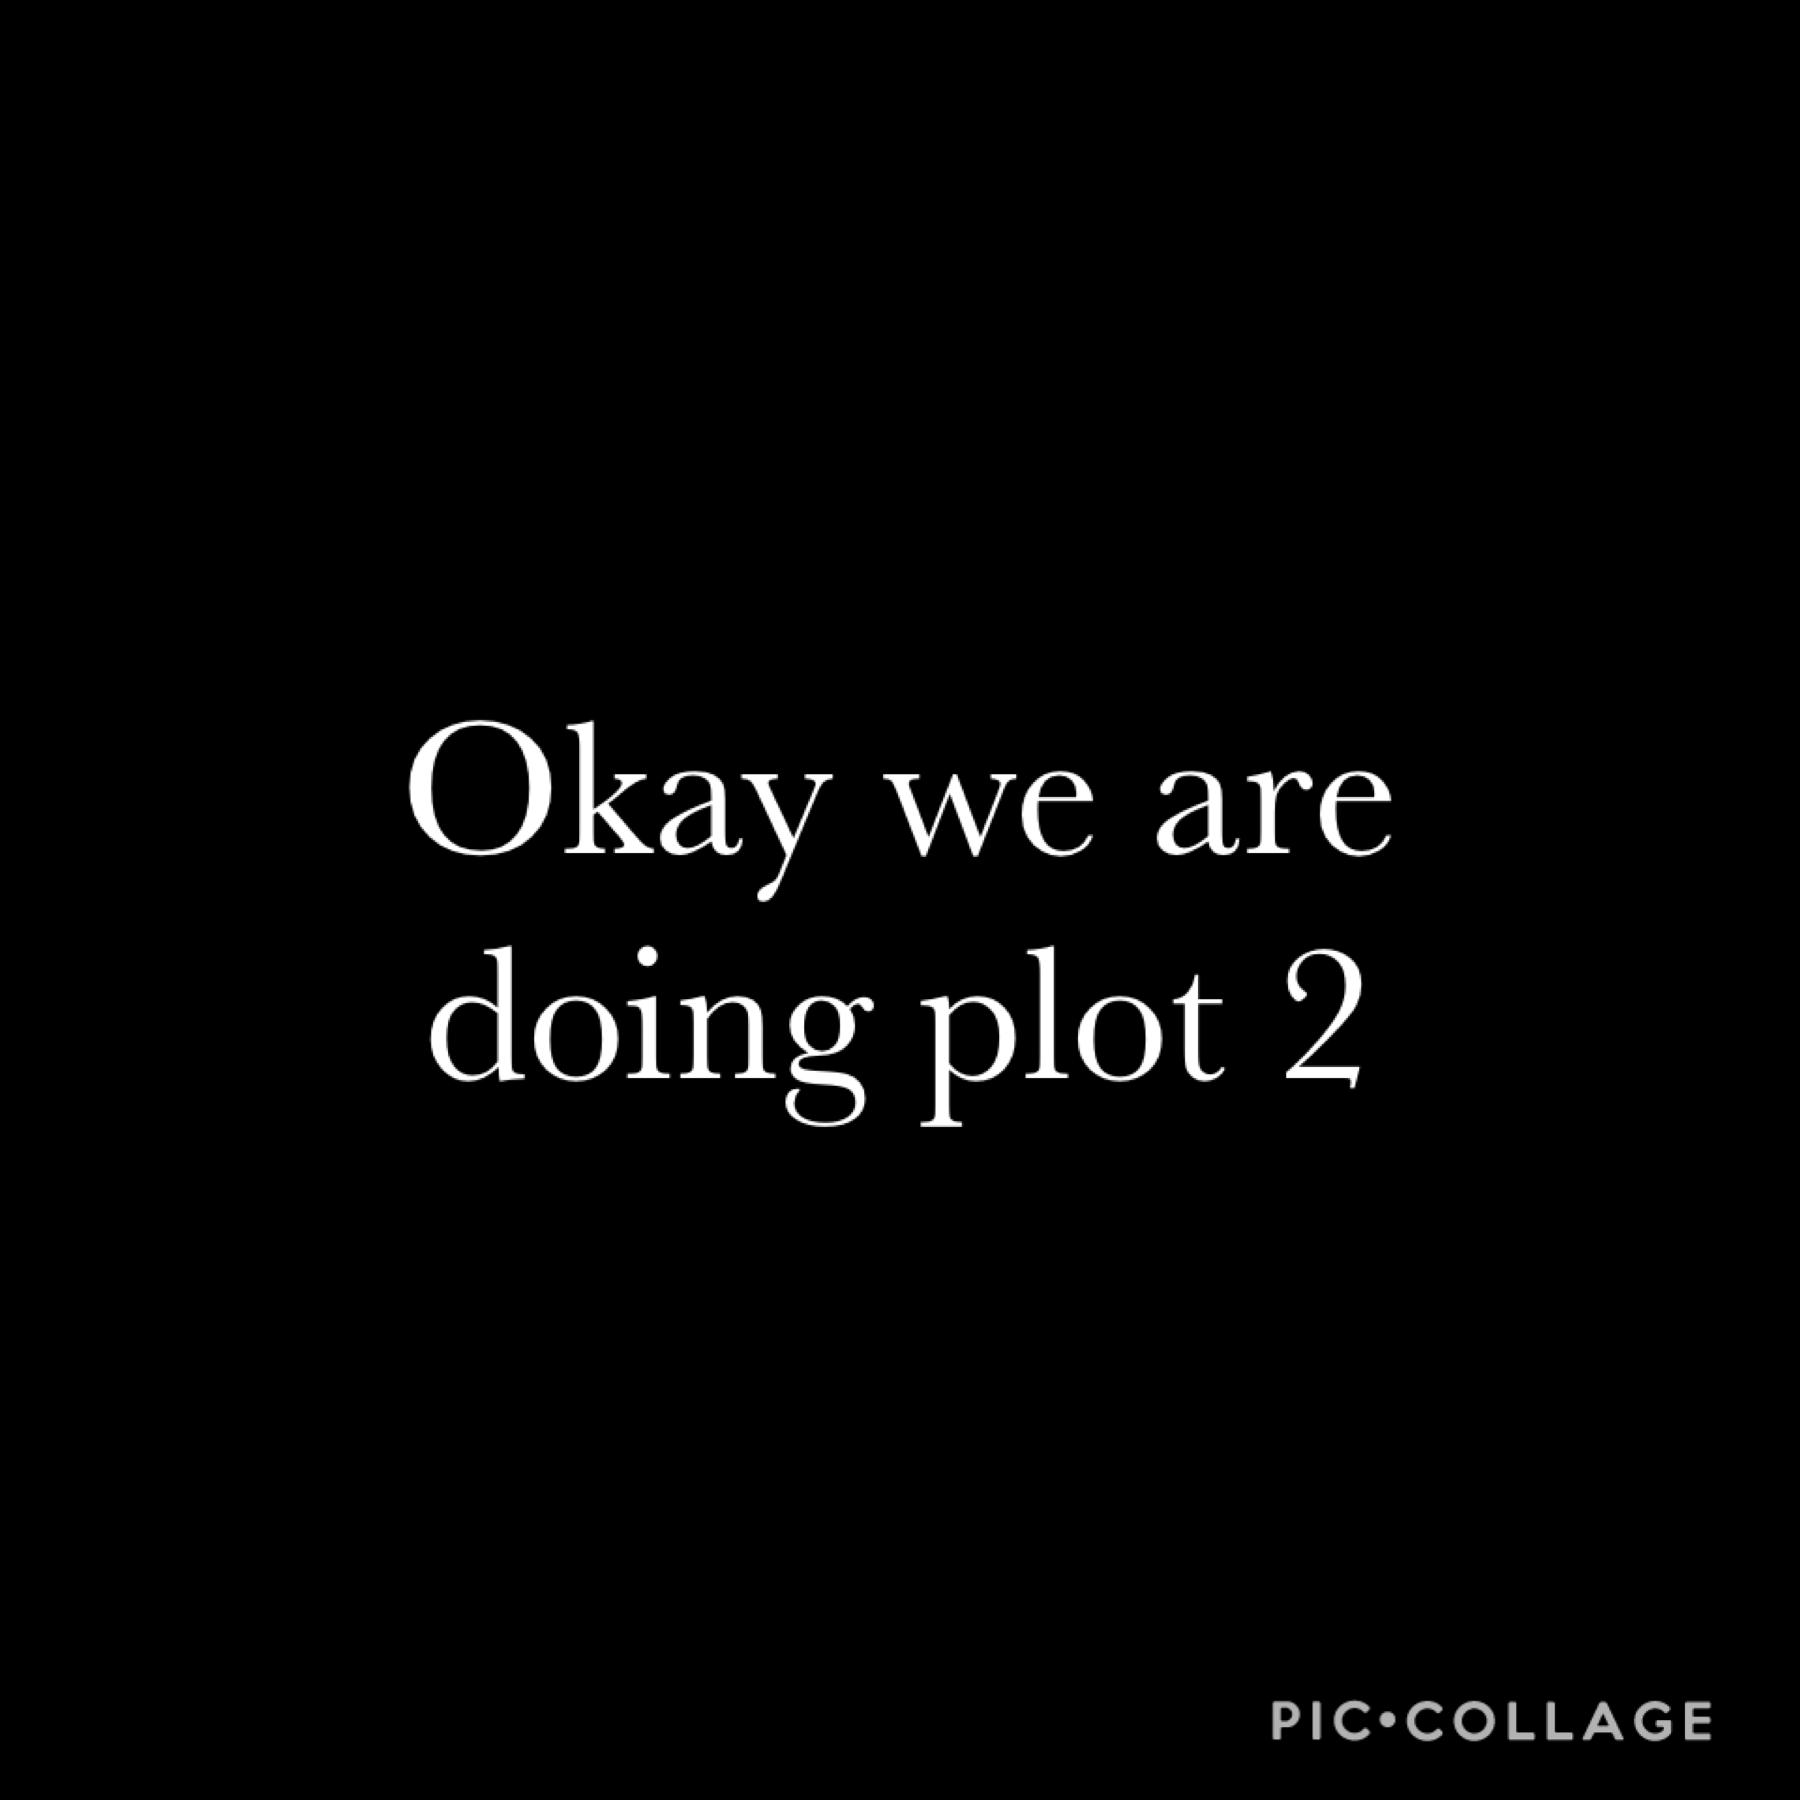 but what will plot two be? oh to find out in due time next week :)) 
so go tell everyone in this rp that we’re bringing it back with more drama